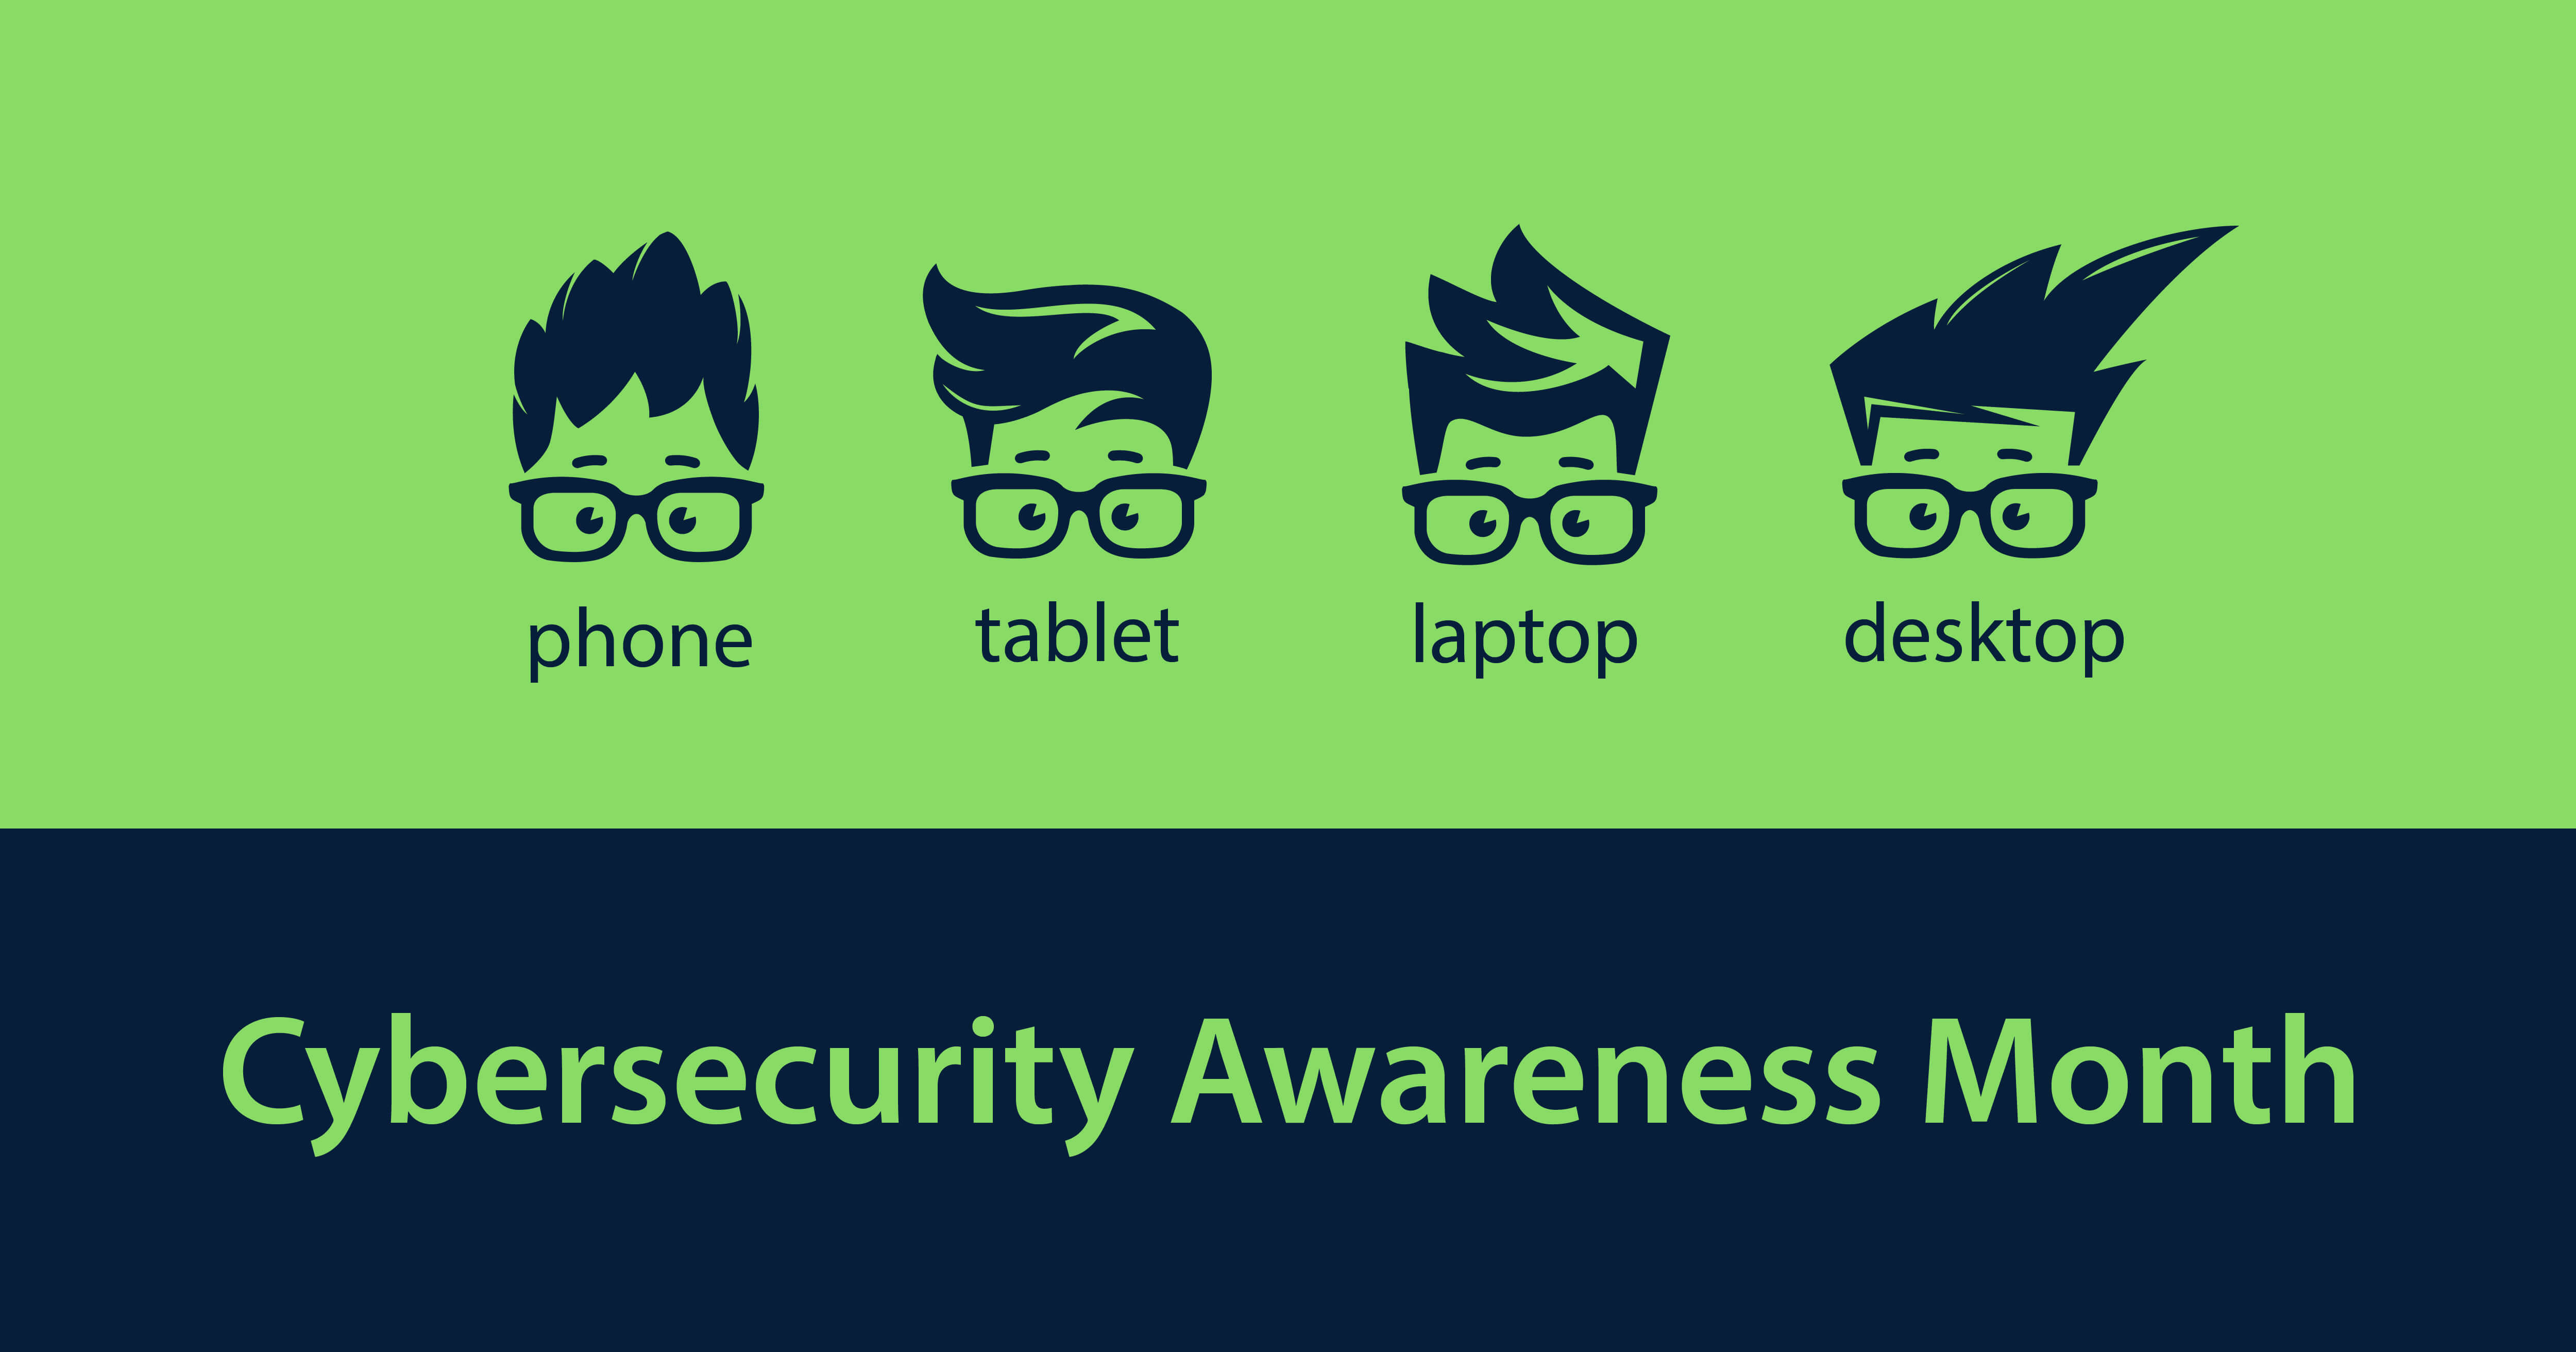 Cybersecurity Awareness Month written on a graphic with a green and blue background